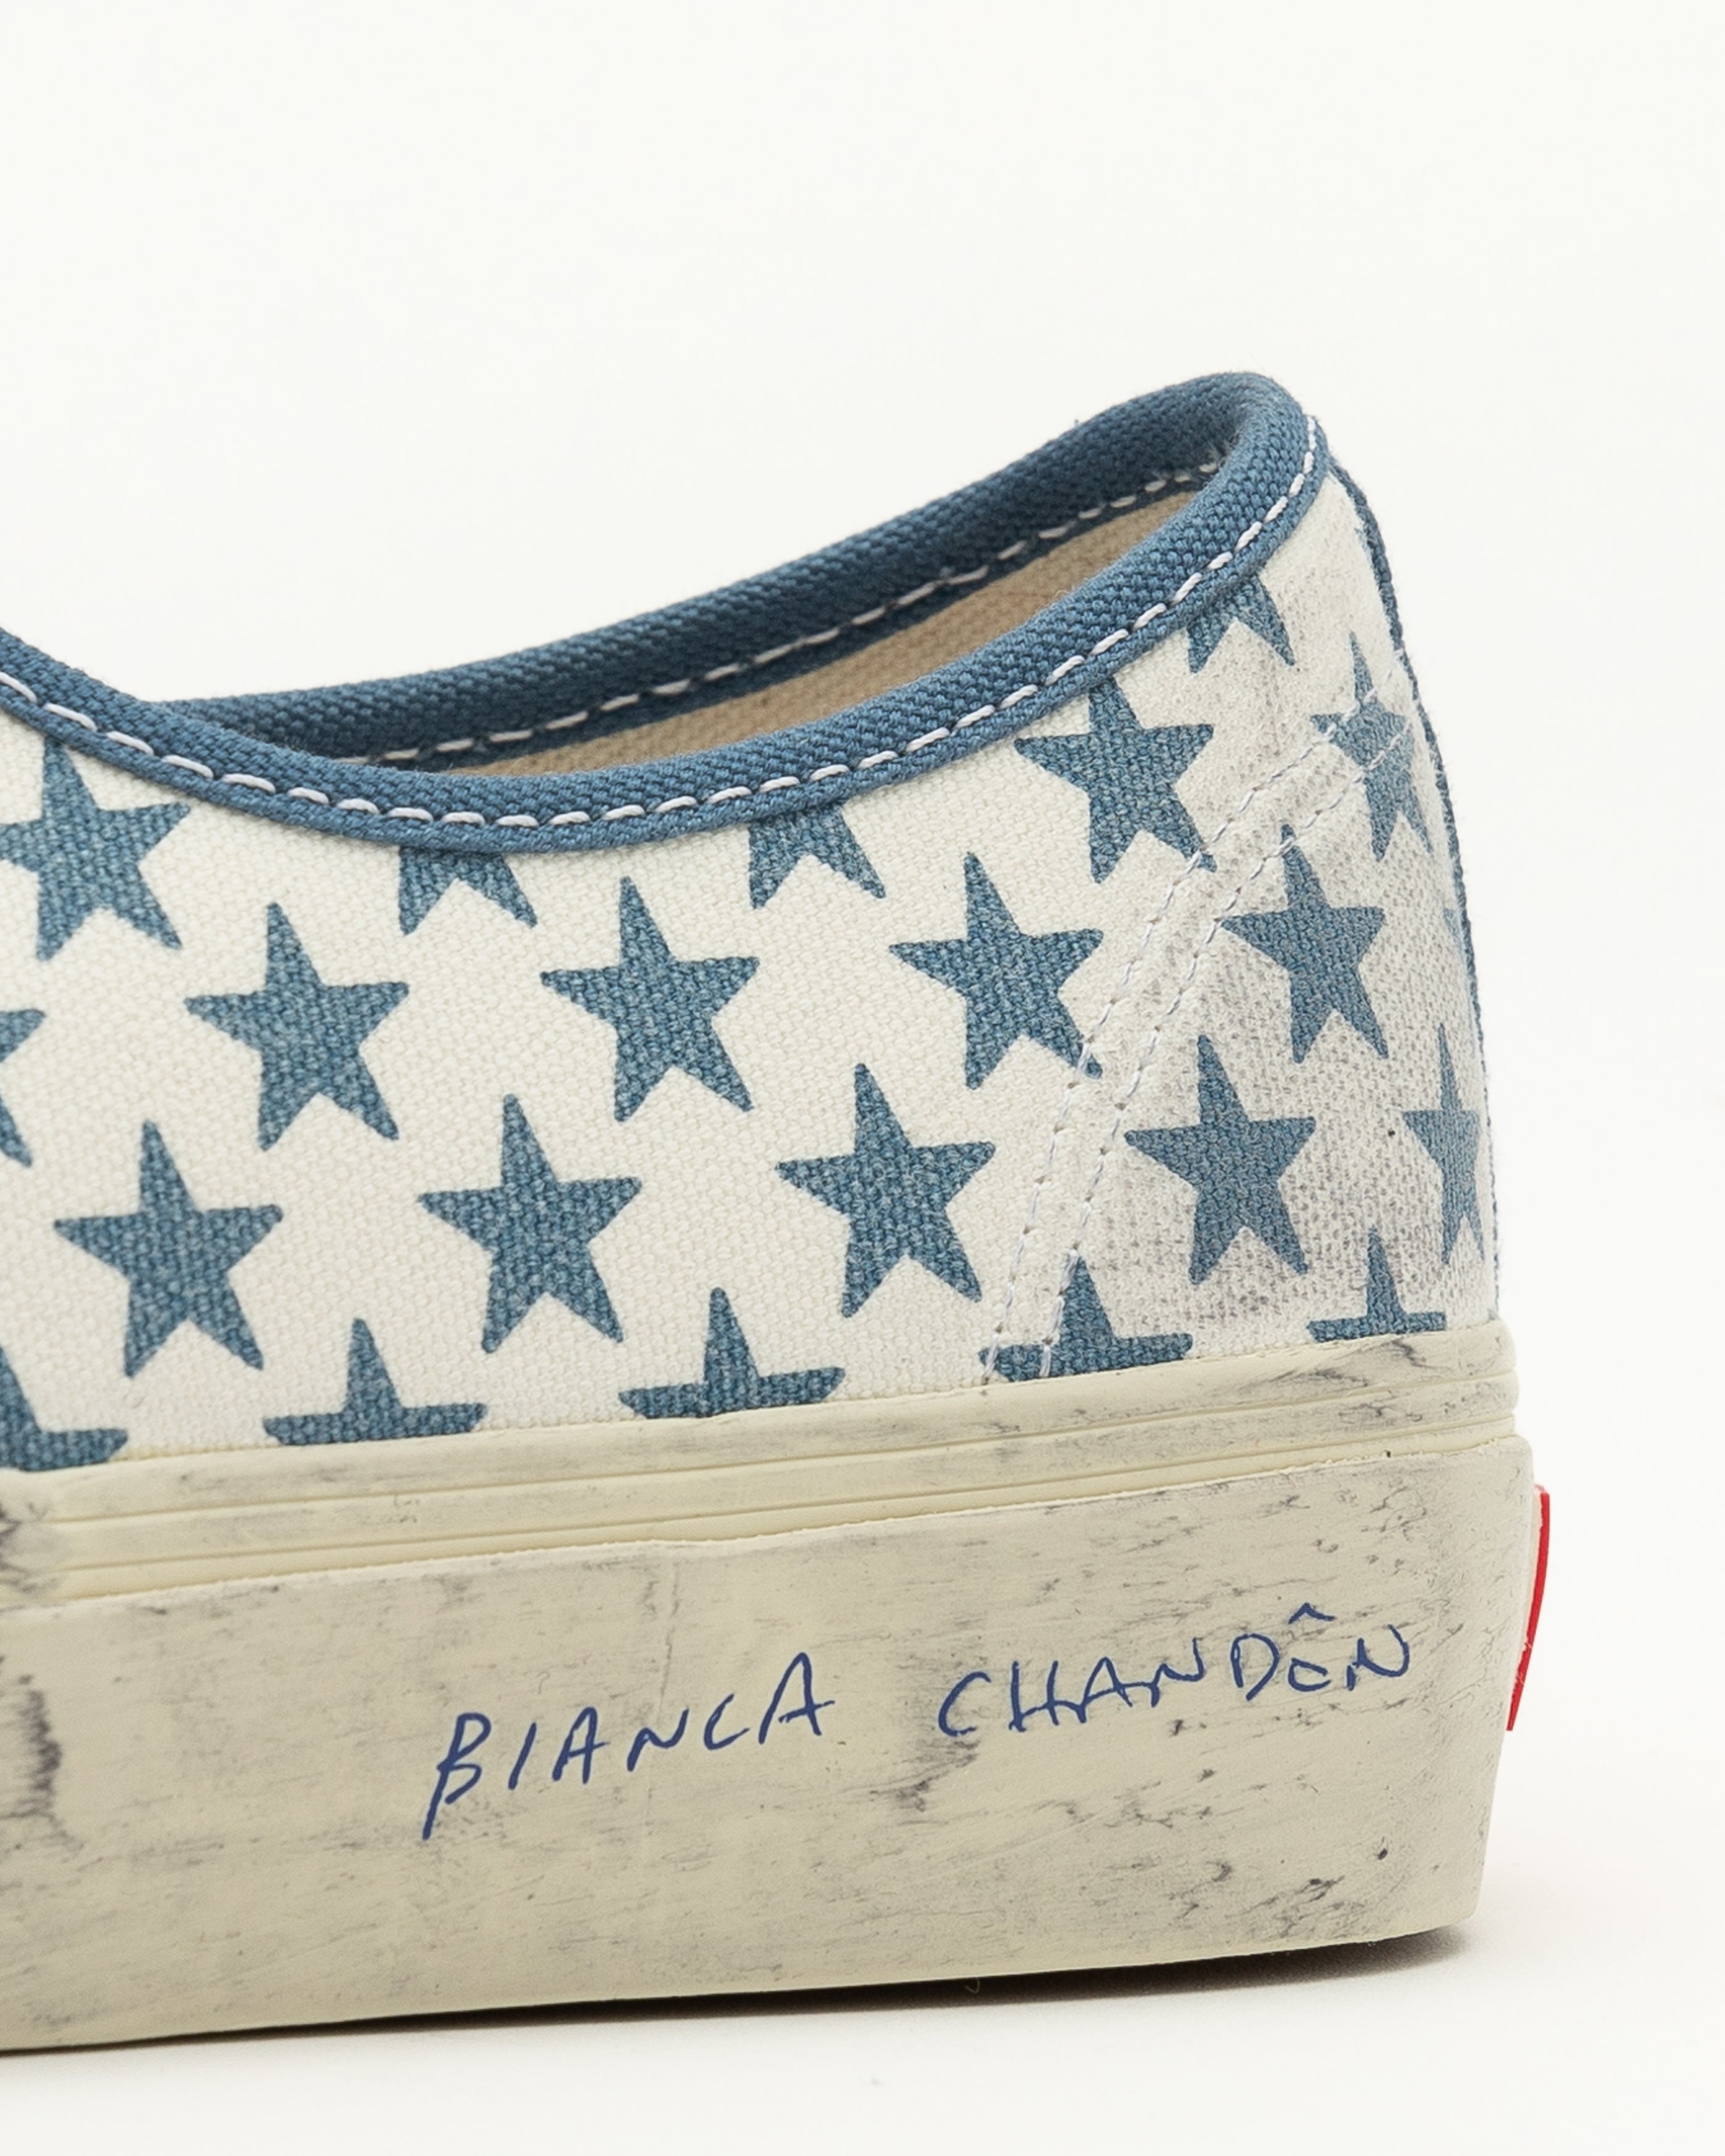 UA Authentic VLT LX BIANCA CHANDON in Navy and White